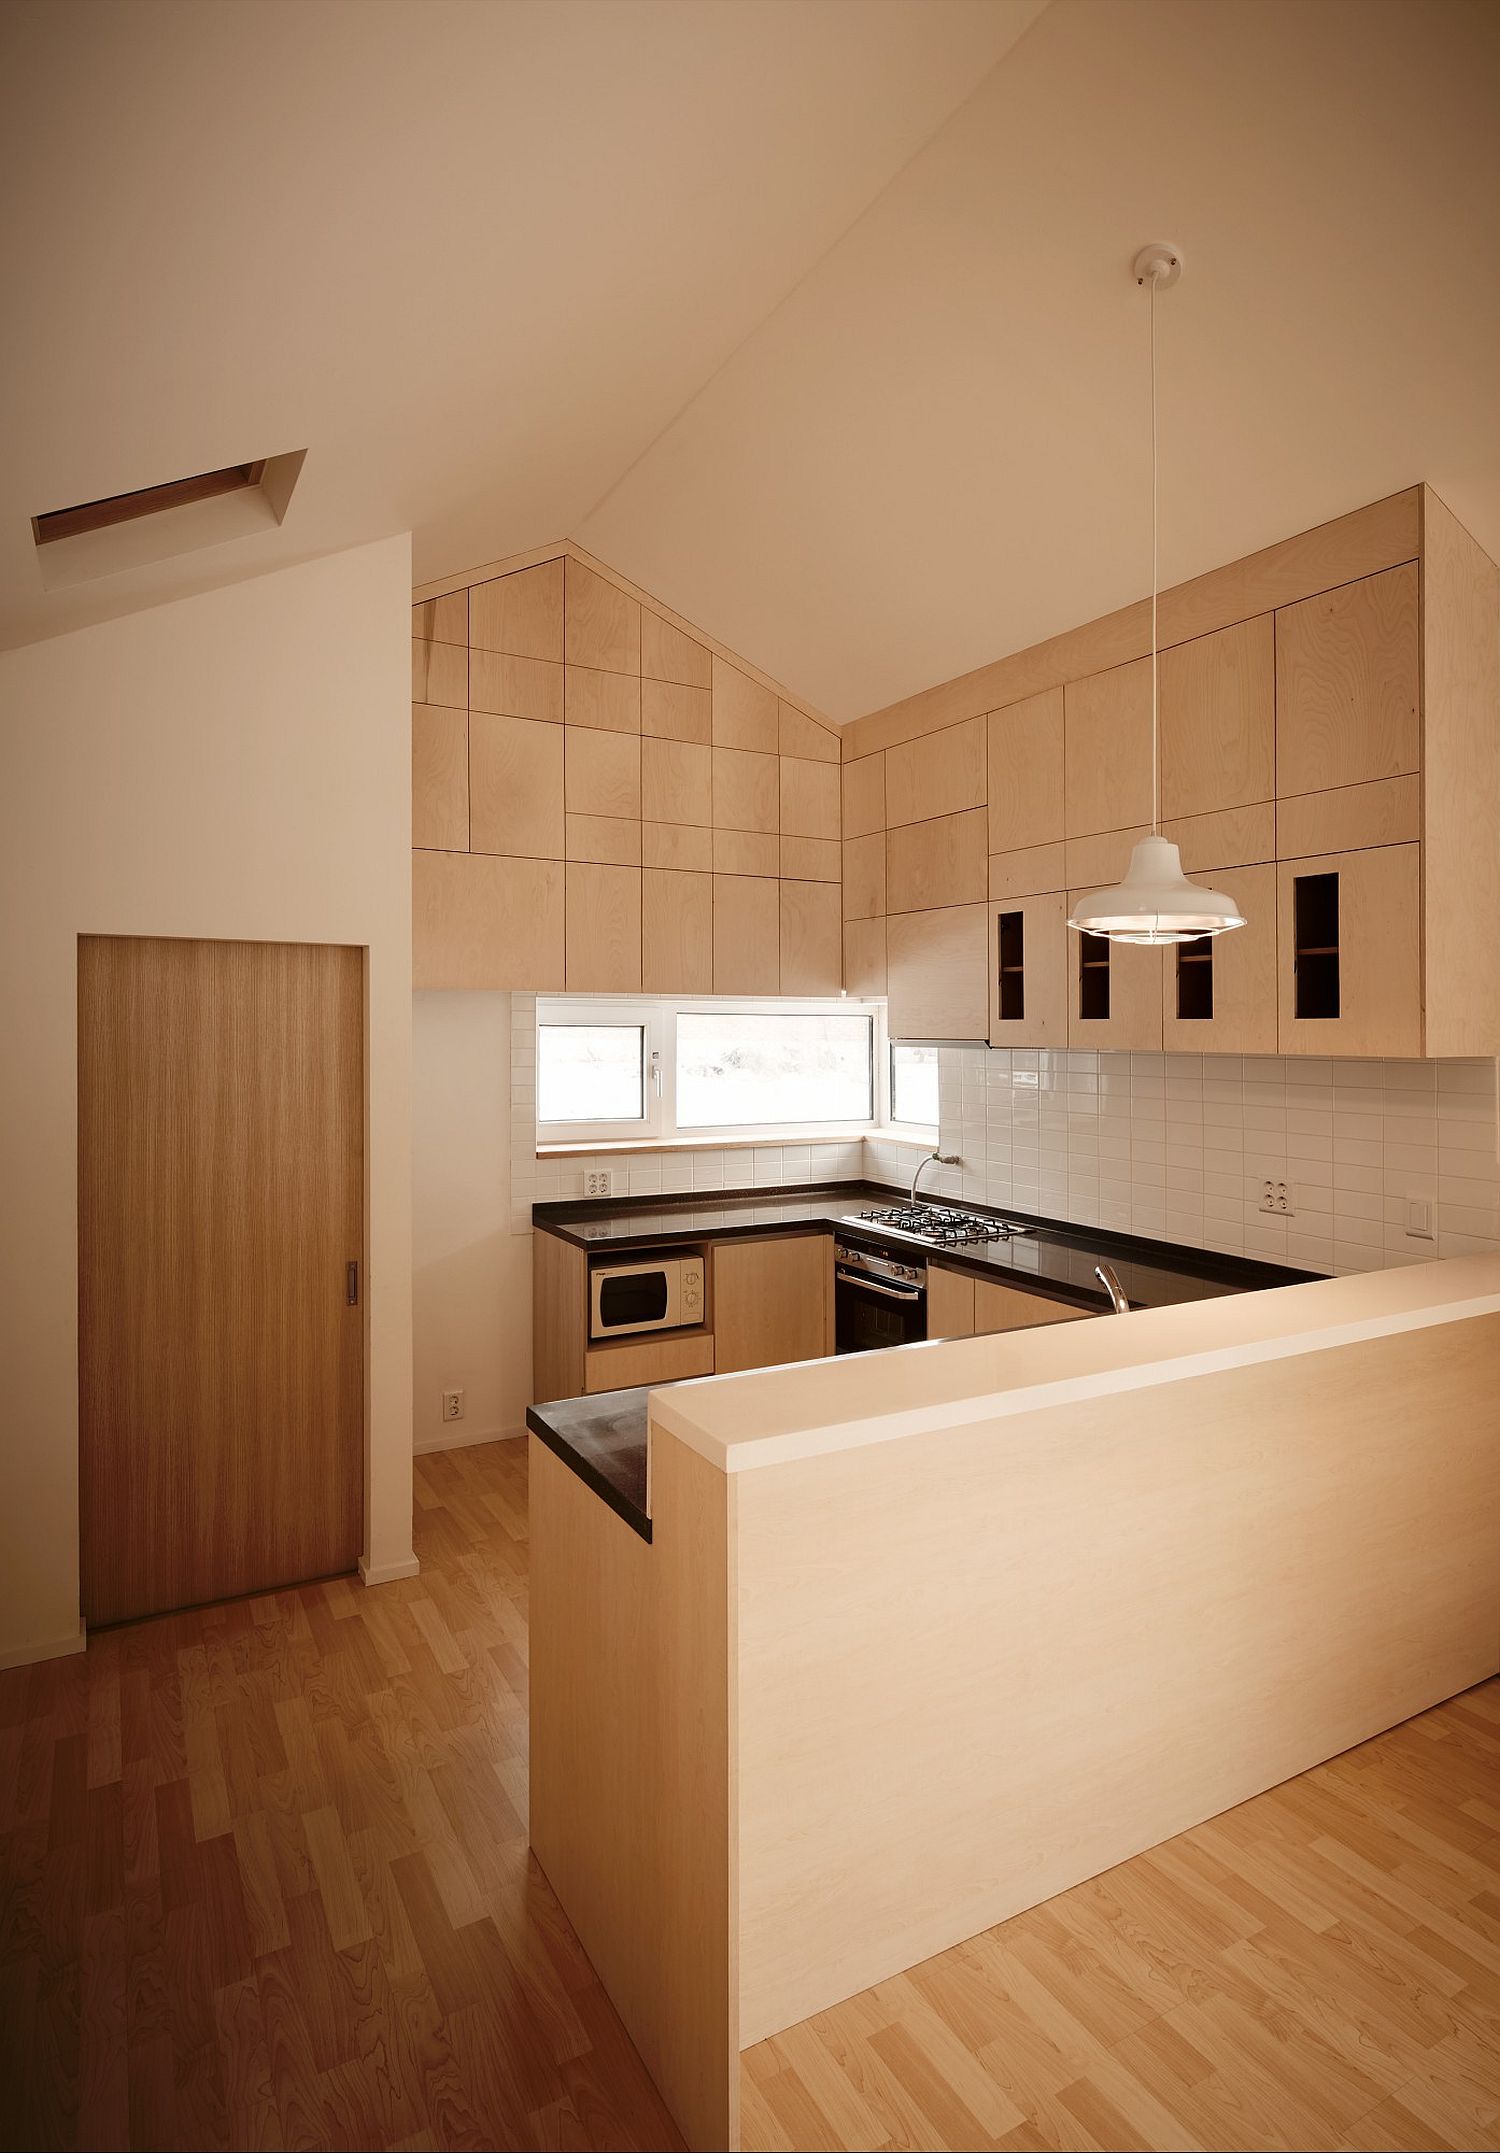 Wooden-kitchen-and-interior-of-the-budget-South-Korean-home